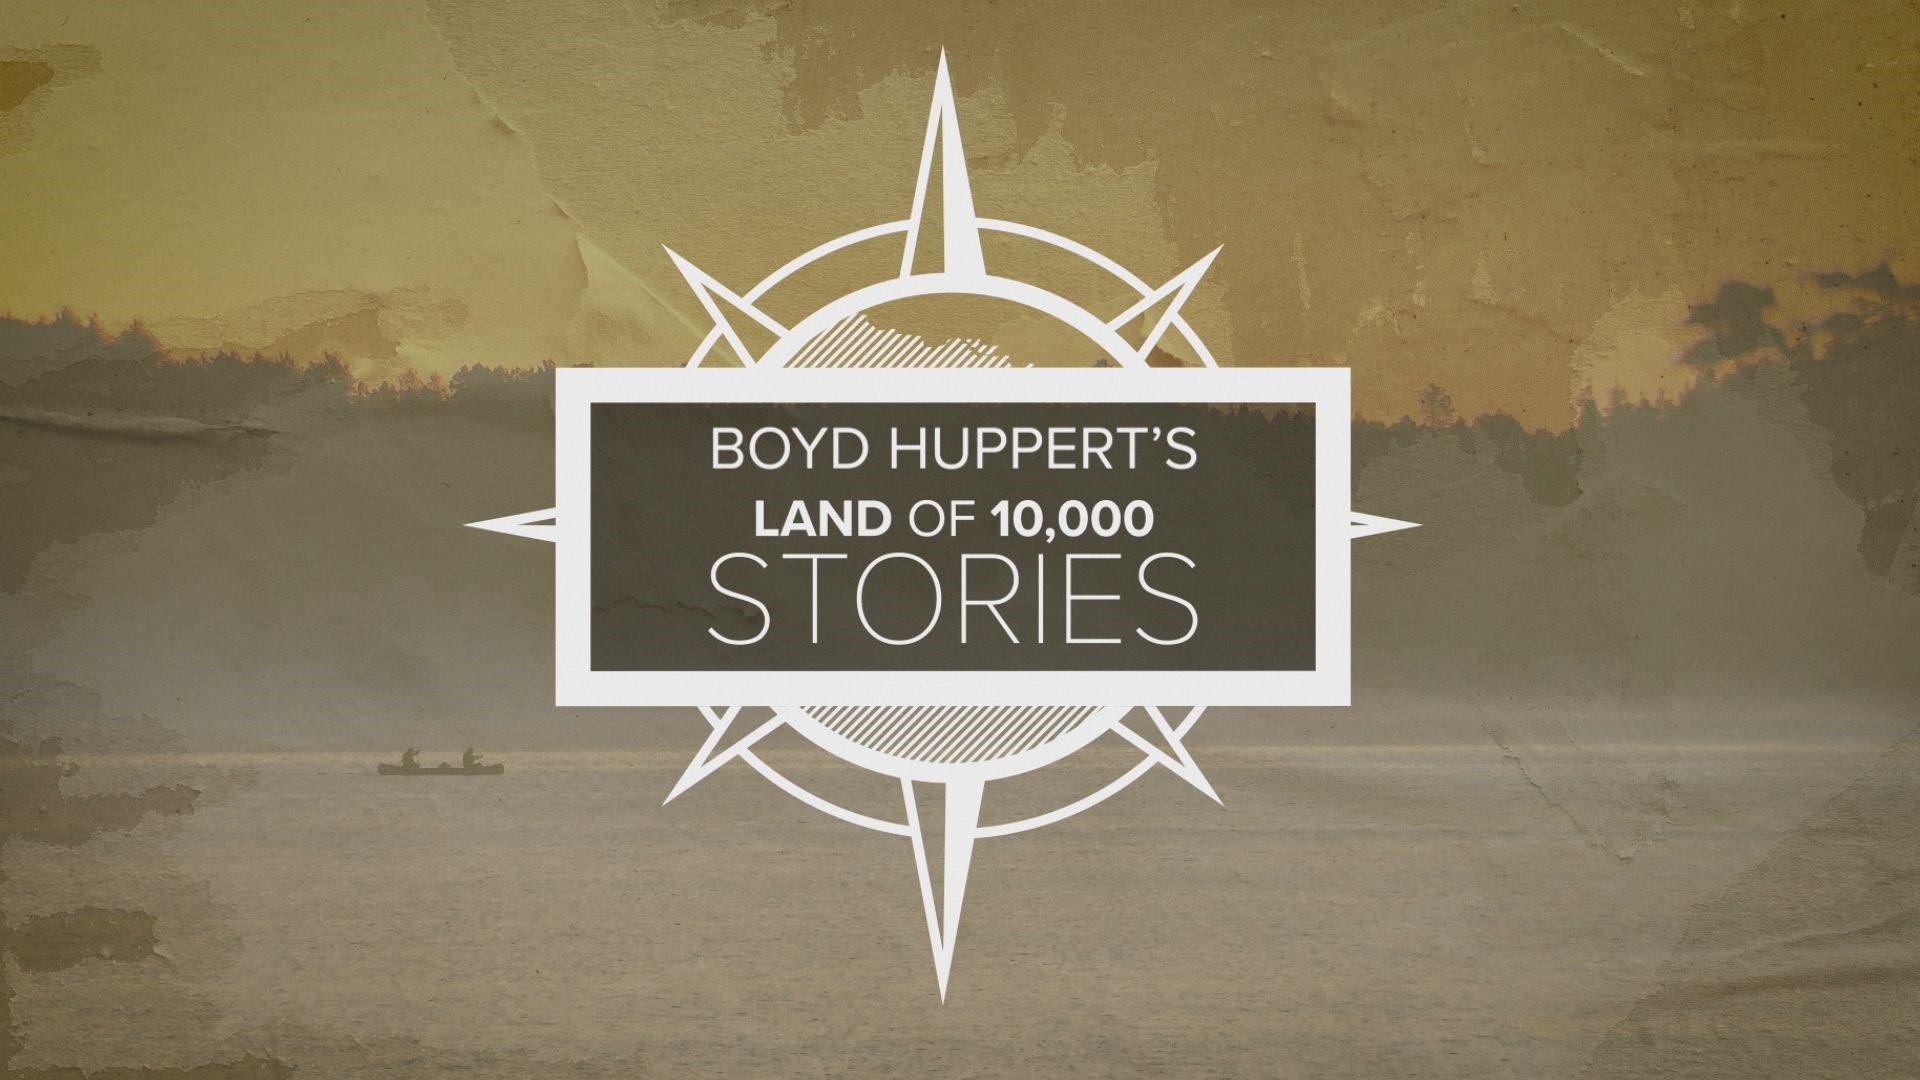 KARE 11 recaps the best of Boyd Huppert's Land of 10,000 Stories in 2021, in the first of a two-part special.